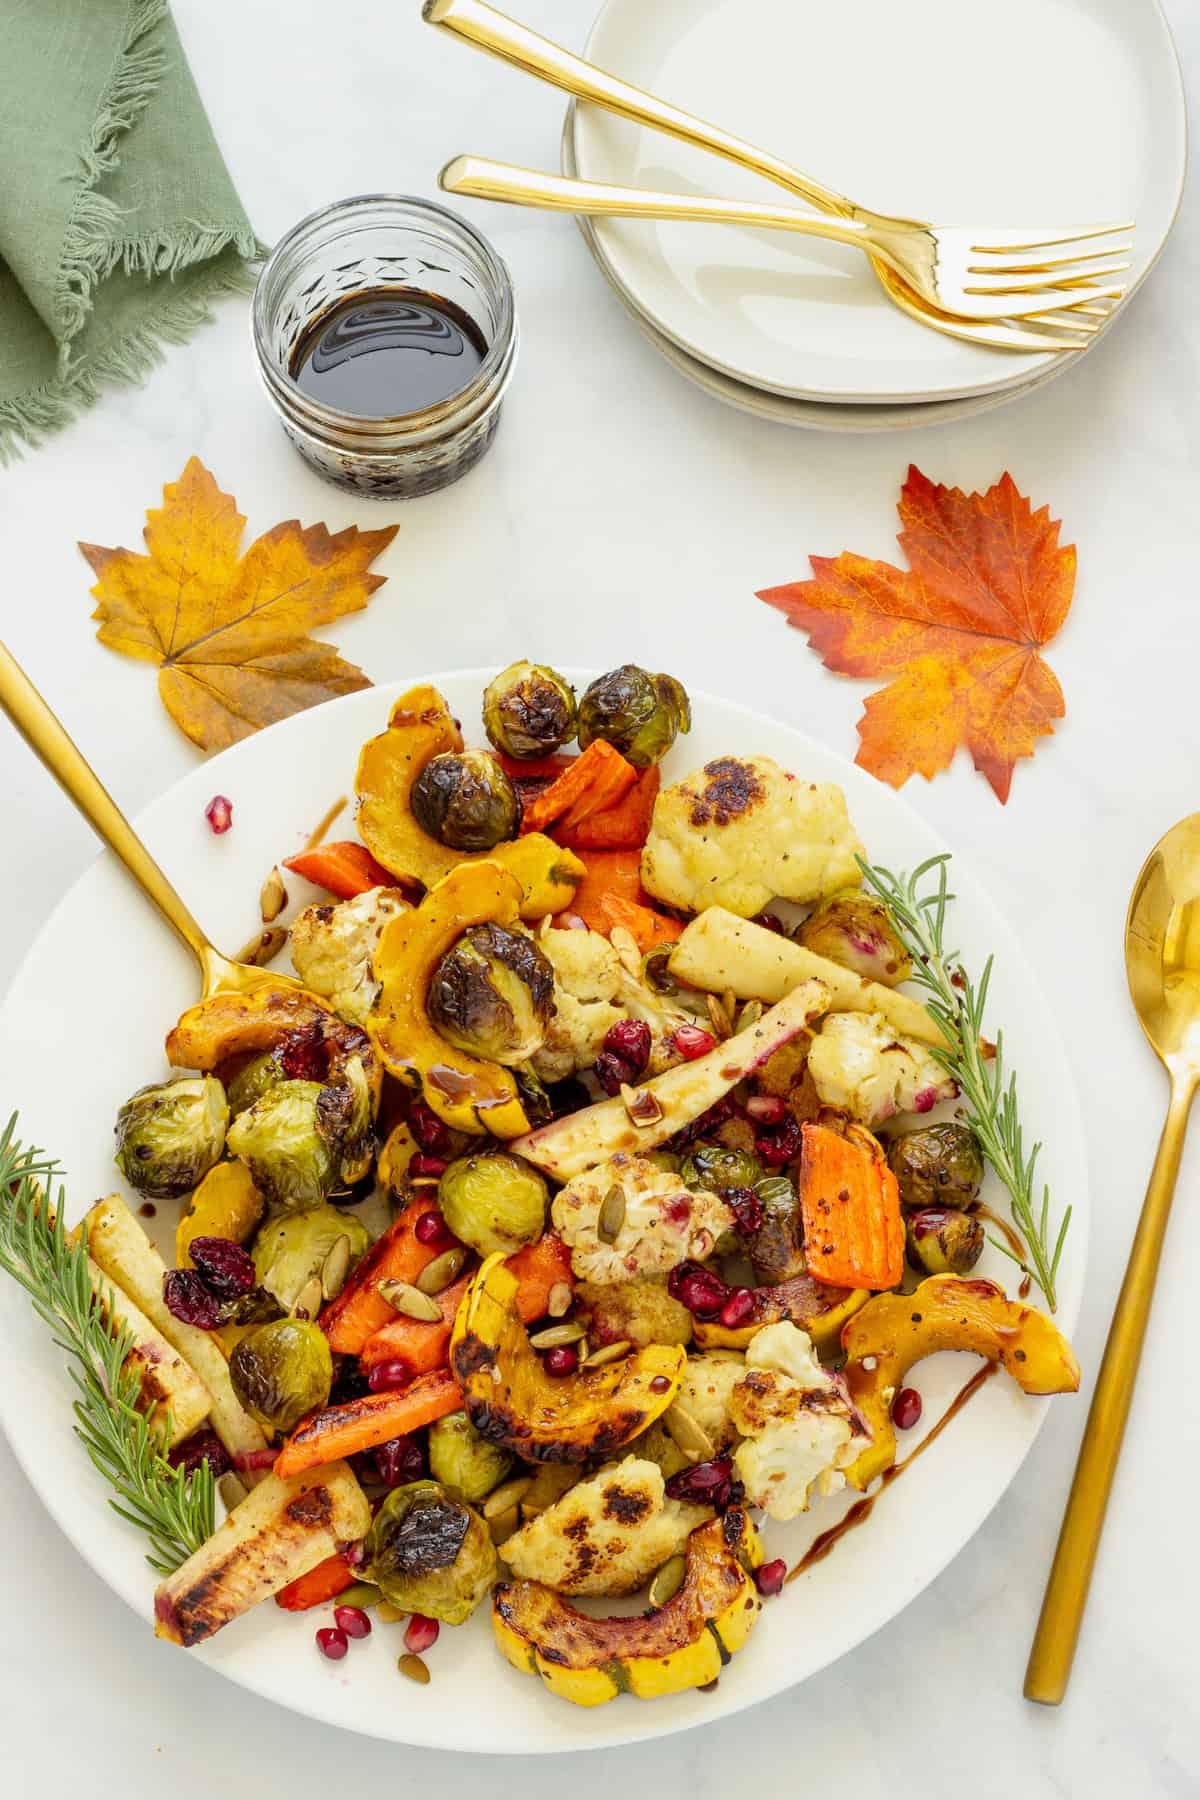 A white platter of roasted fall vegetables with a small jar of balsamic glaze. Fall leaves, serving spoons, forks, and plates are in the background.